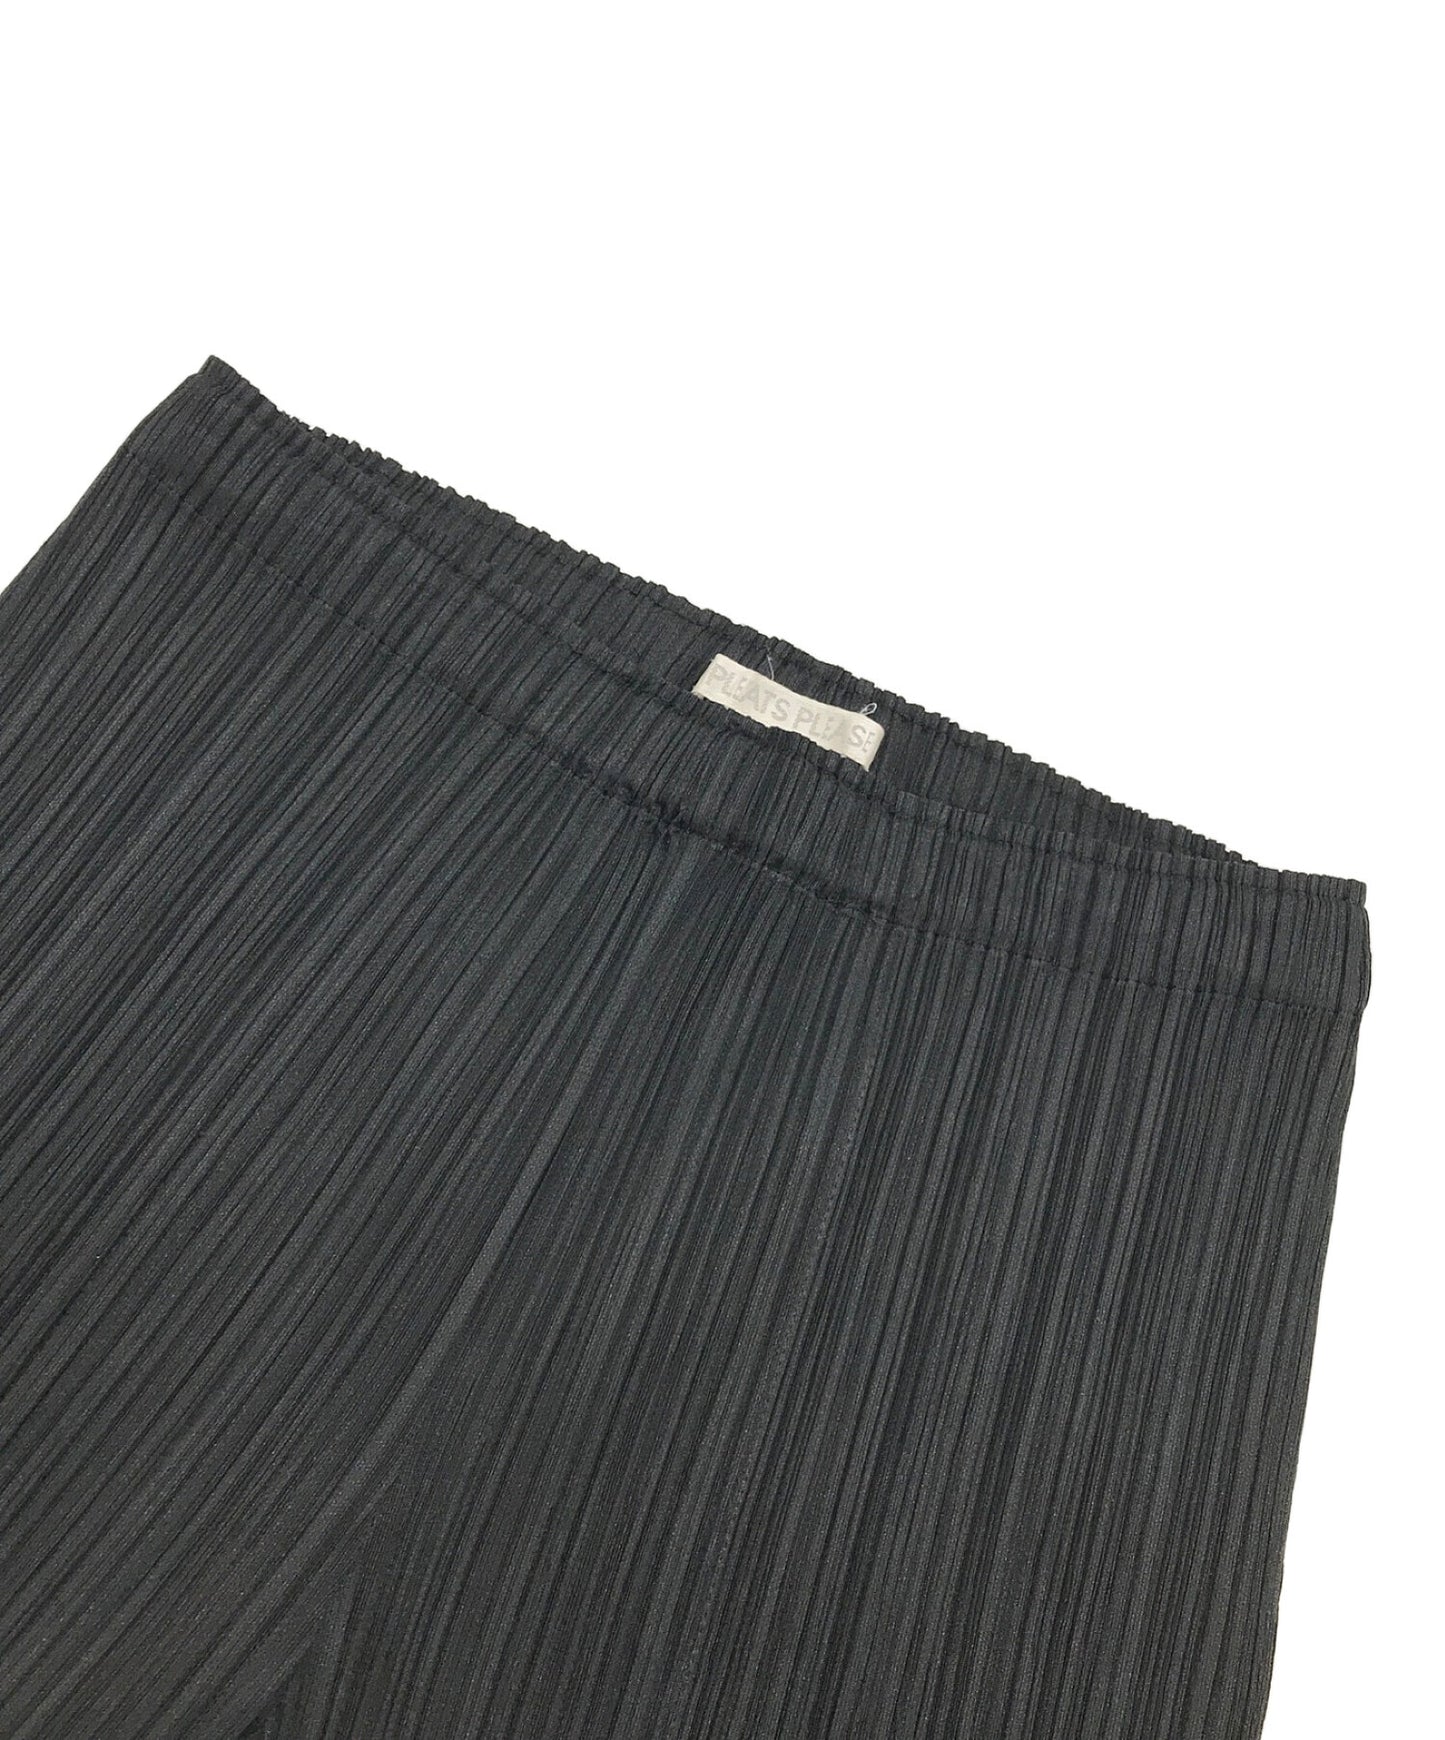 [Pre-owned] PLEATS PLEASE Pleated Pants Pants Bottoms